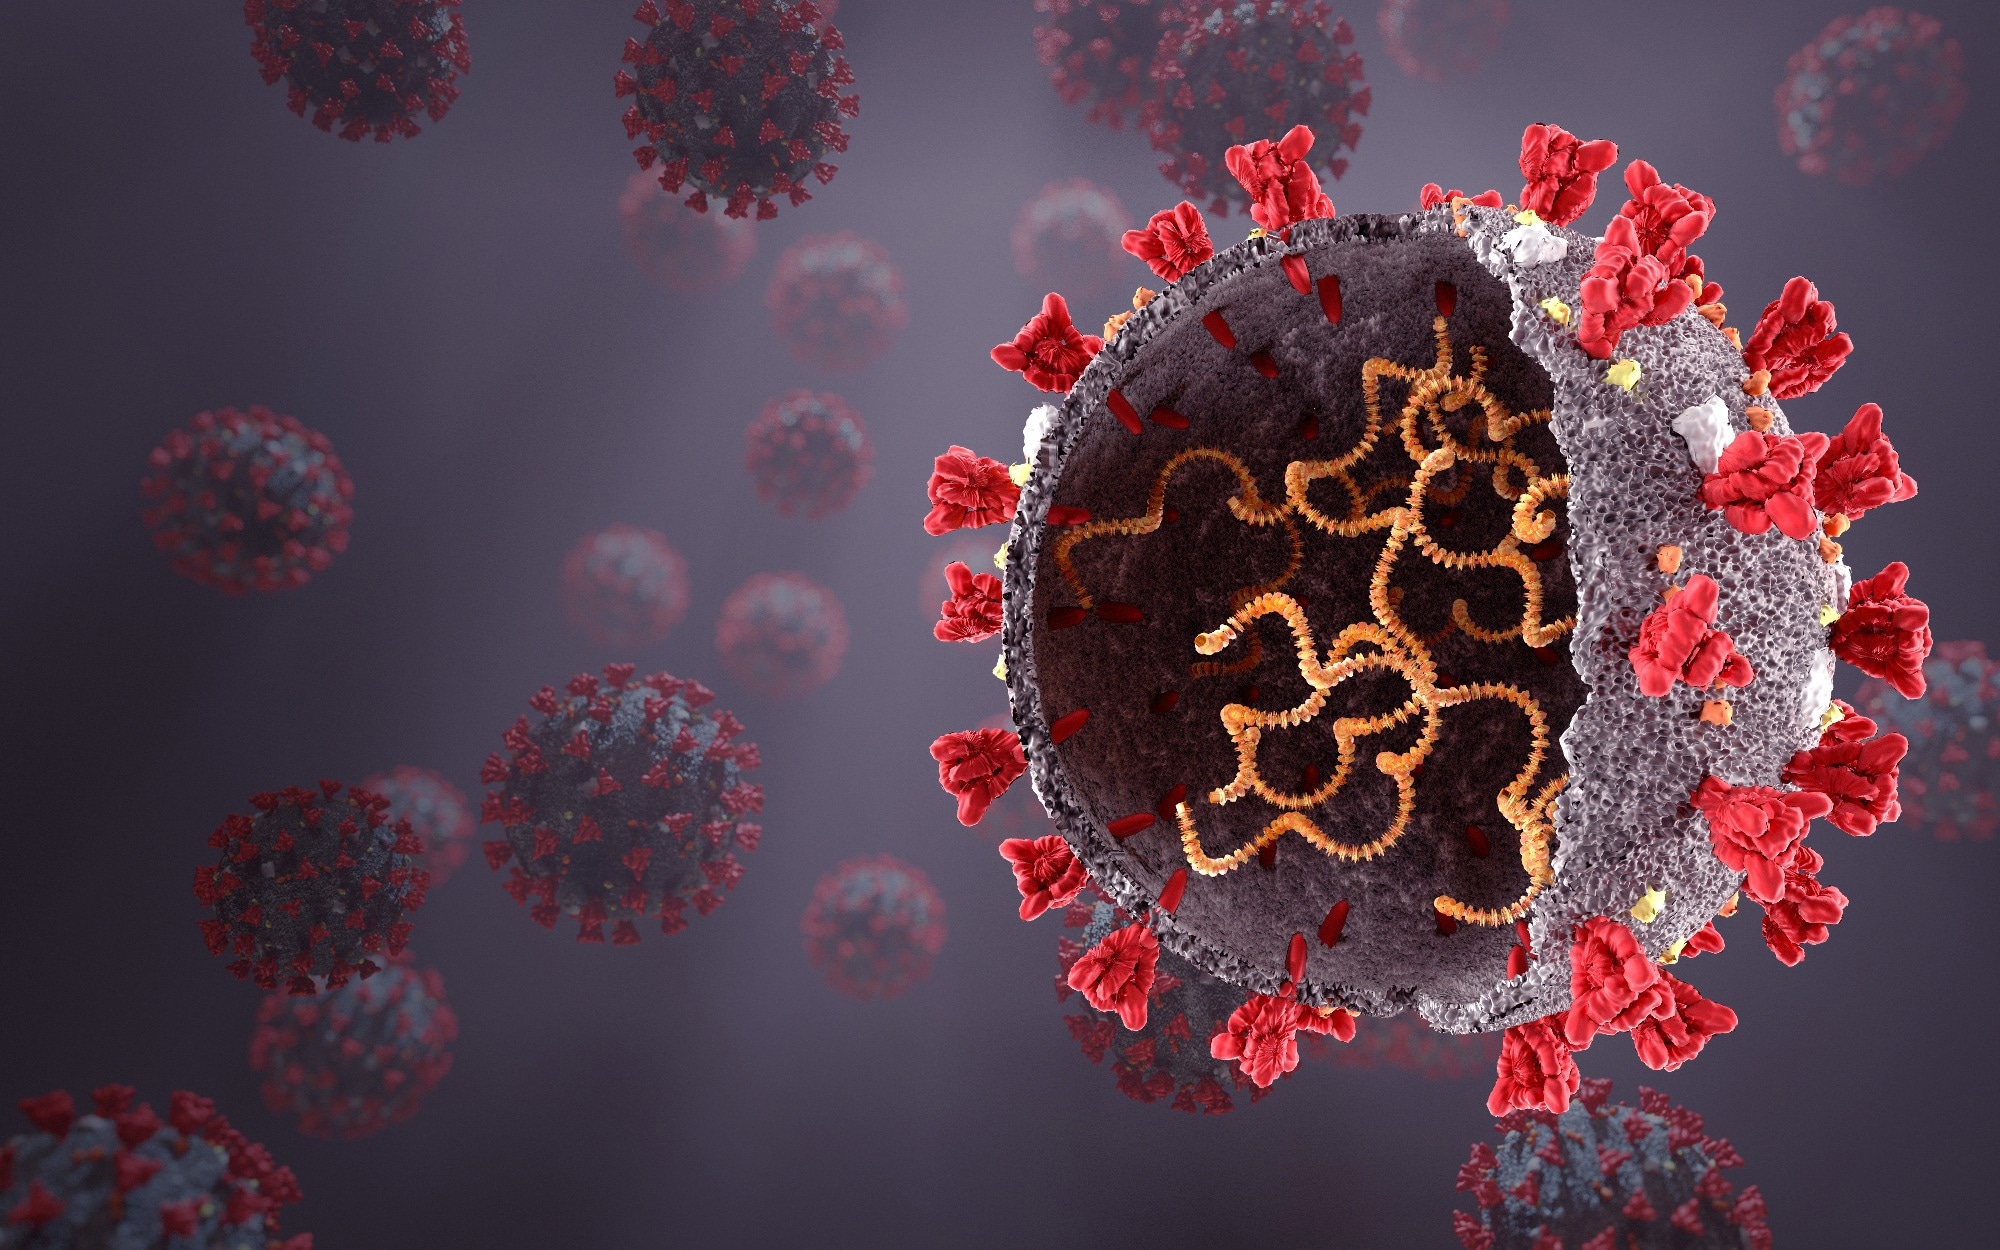 Study: Virological characteristics of the SARS-CoV-2 KP.2 variant. Image Credit: Orpheus FX / Shutterstock